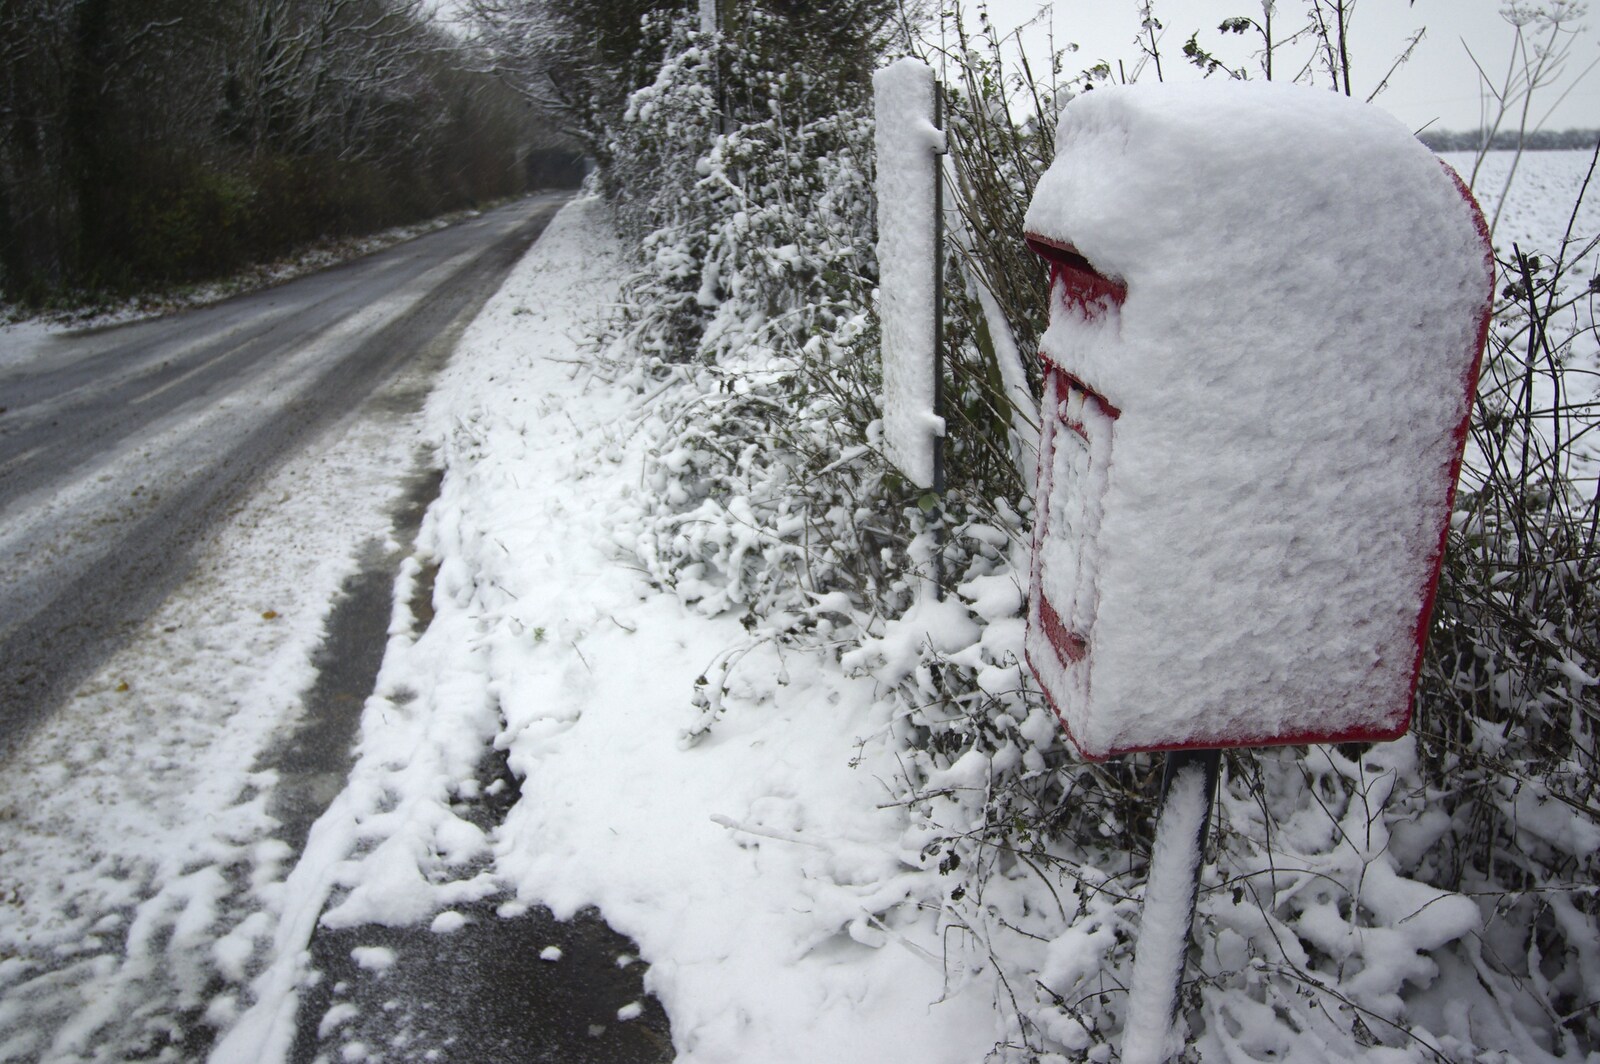 An encrusted post box from Snow Days, Brome, Suffolk - 22nd November 2008